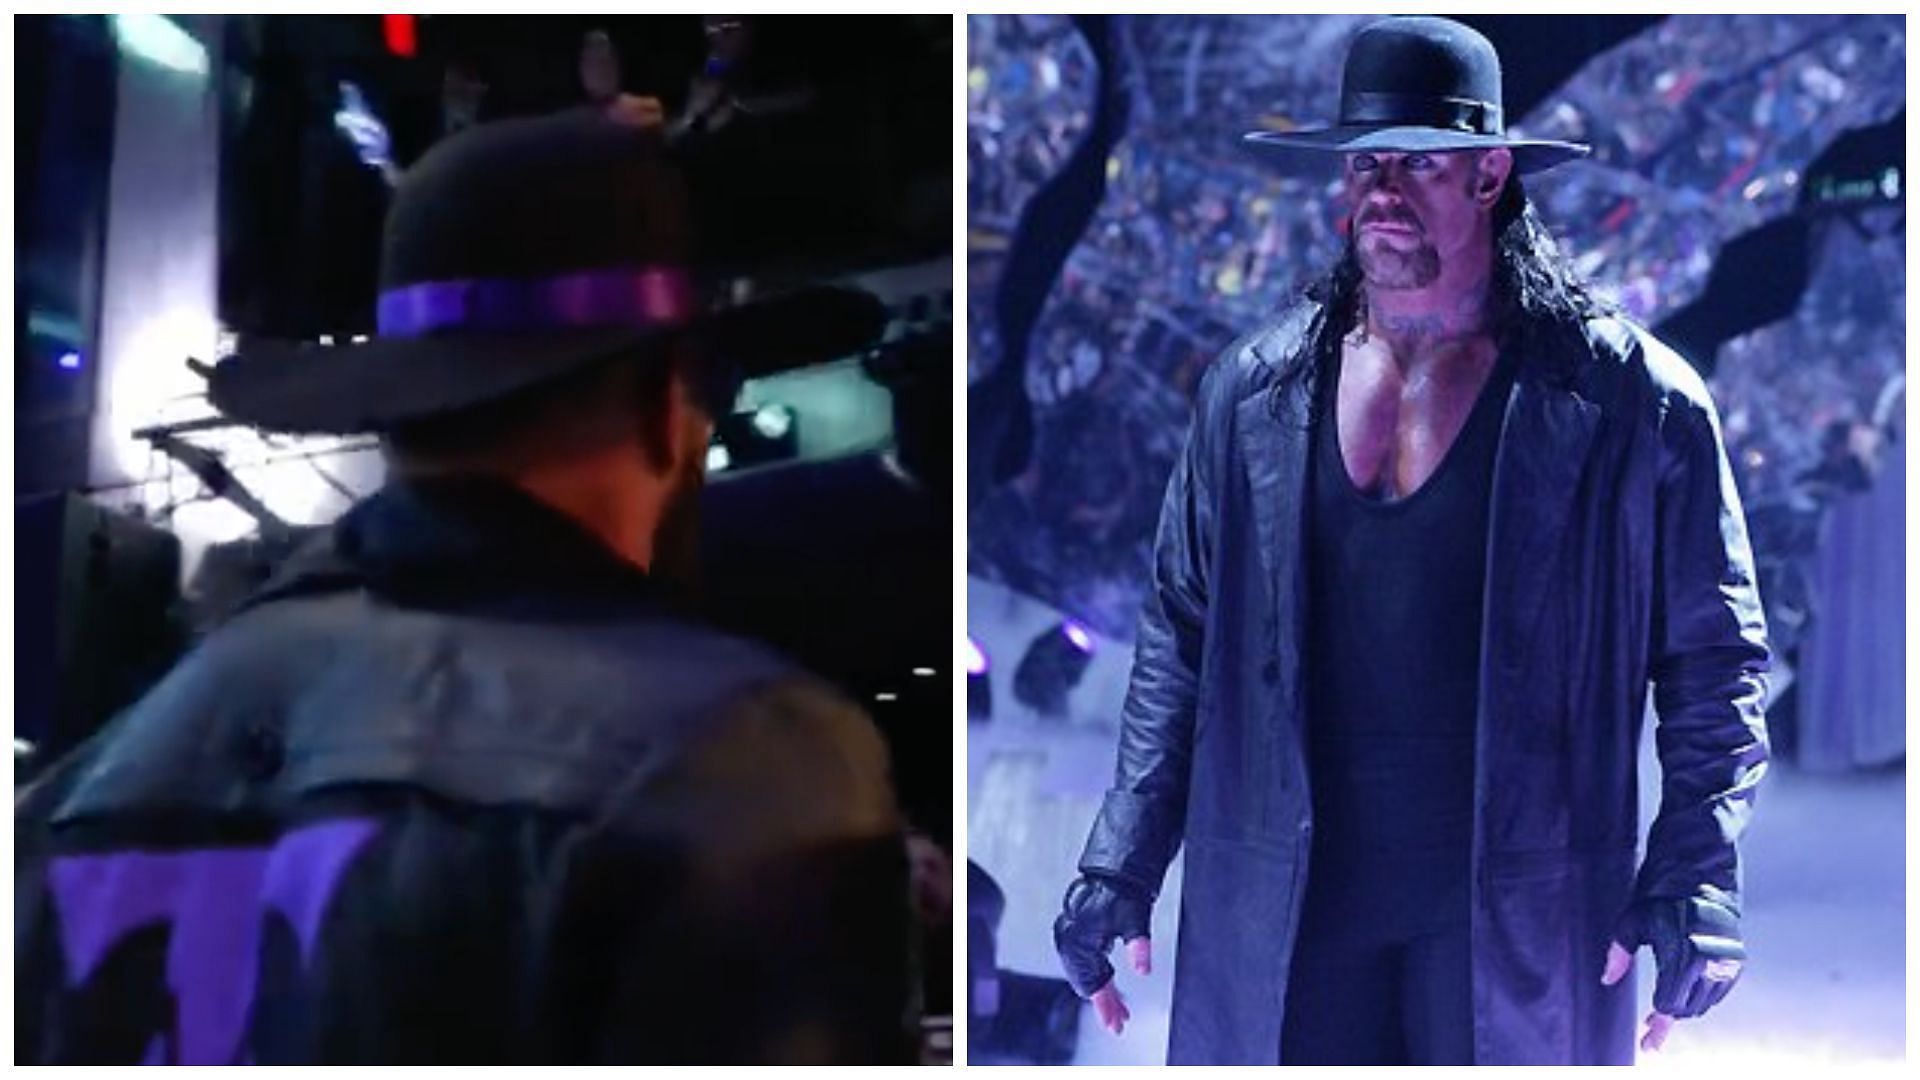 Who would not like to dress up as The Undertaker?